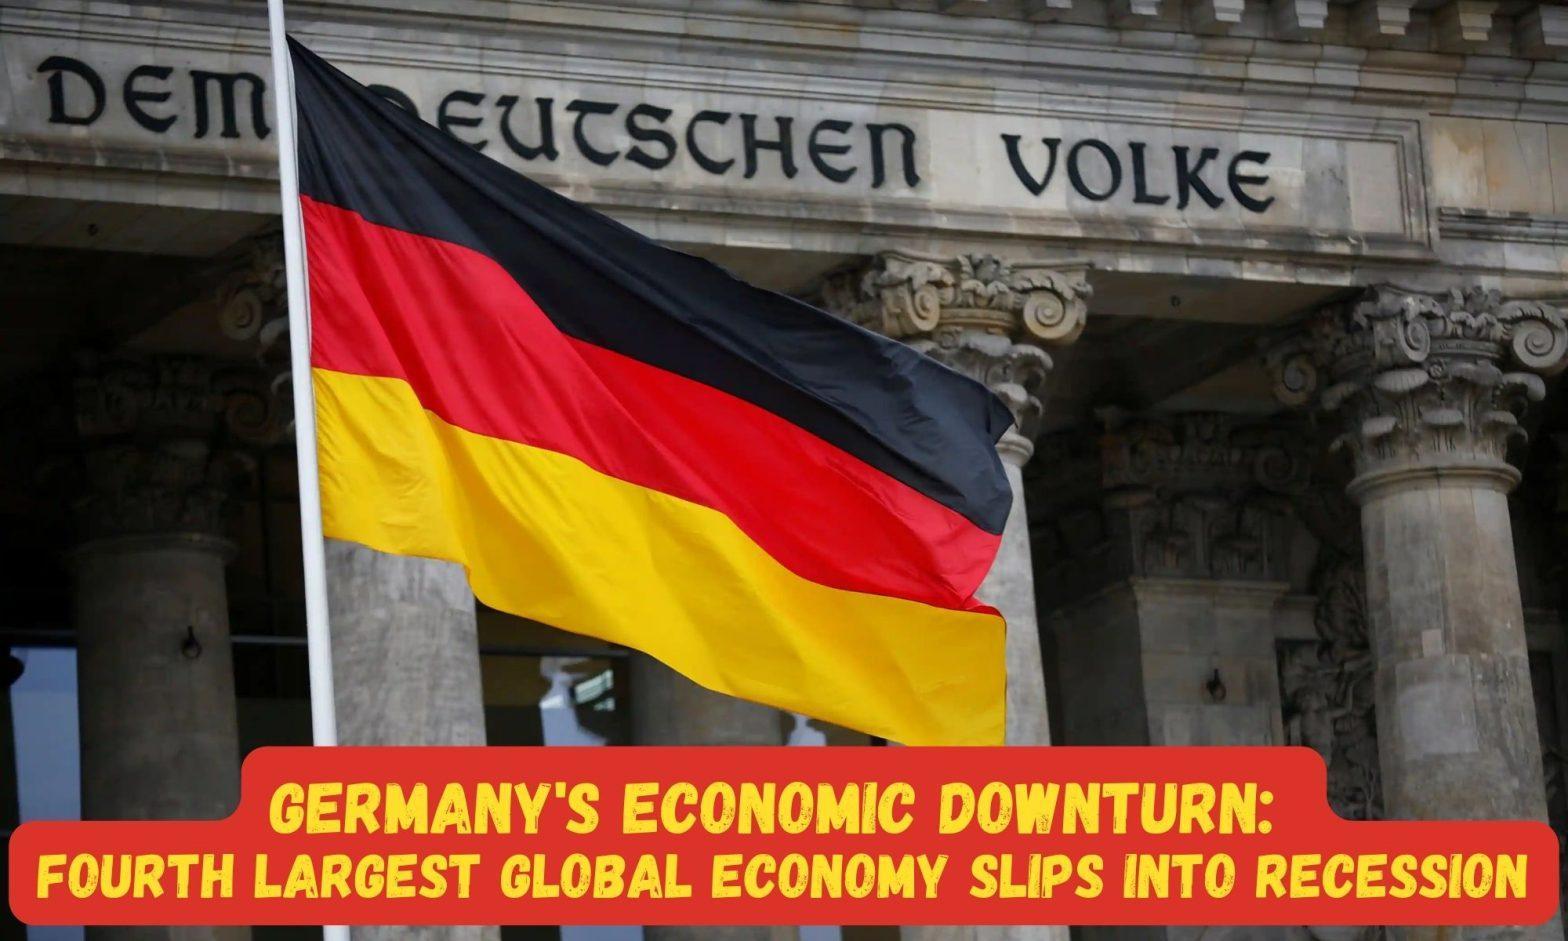 Germany's Economic Downturn: Fourth Largest Global Economy Slips into Recession